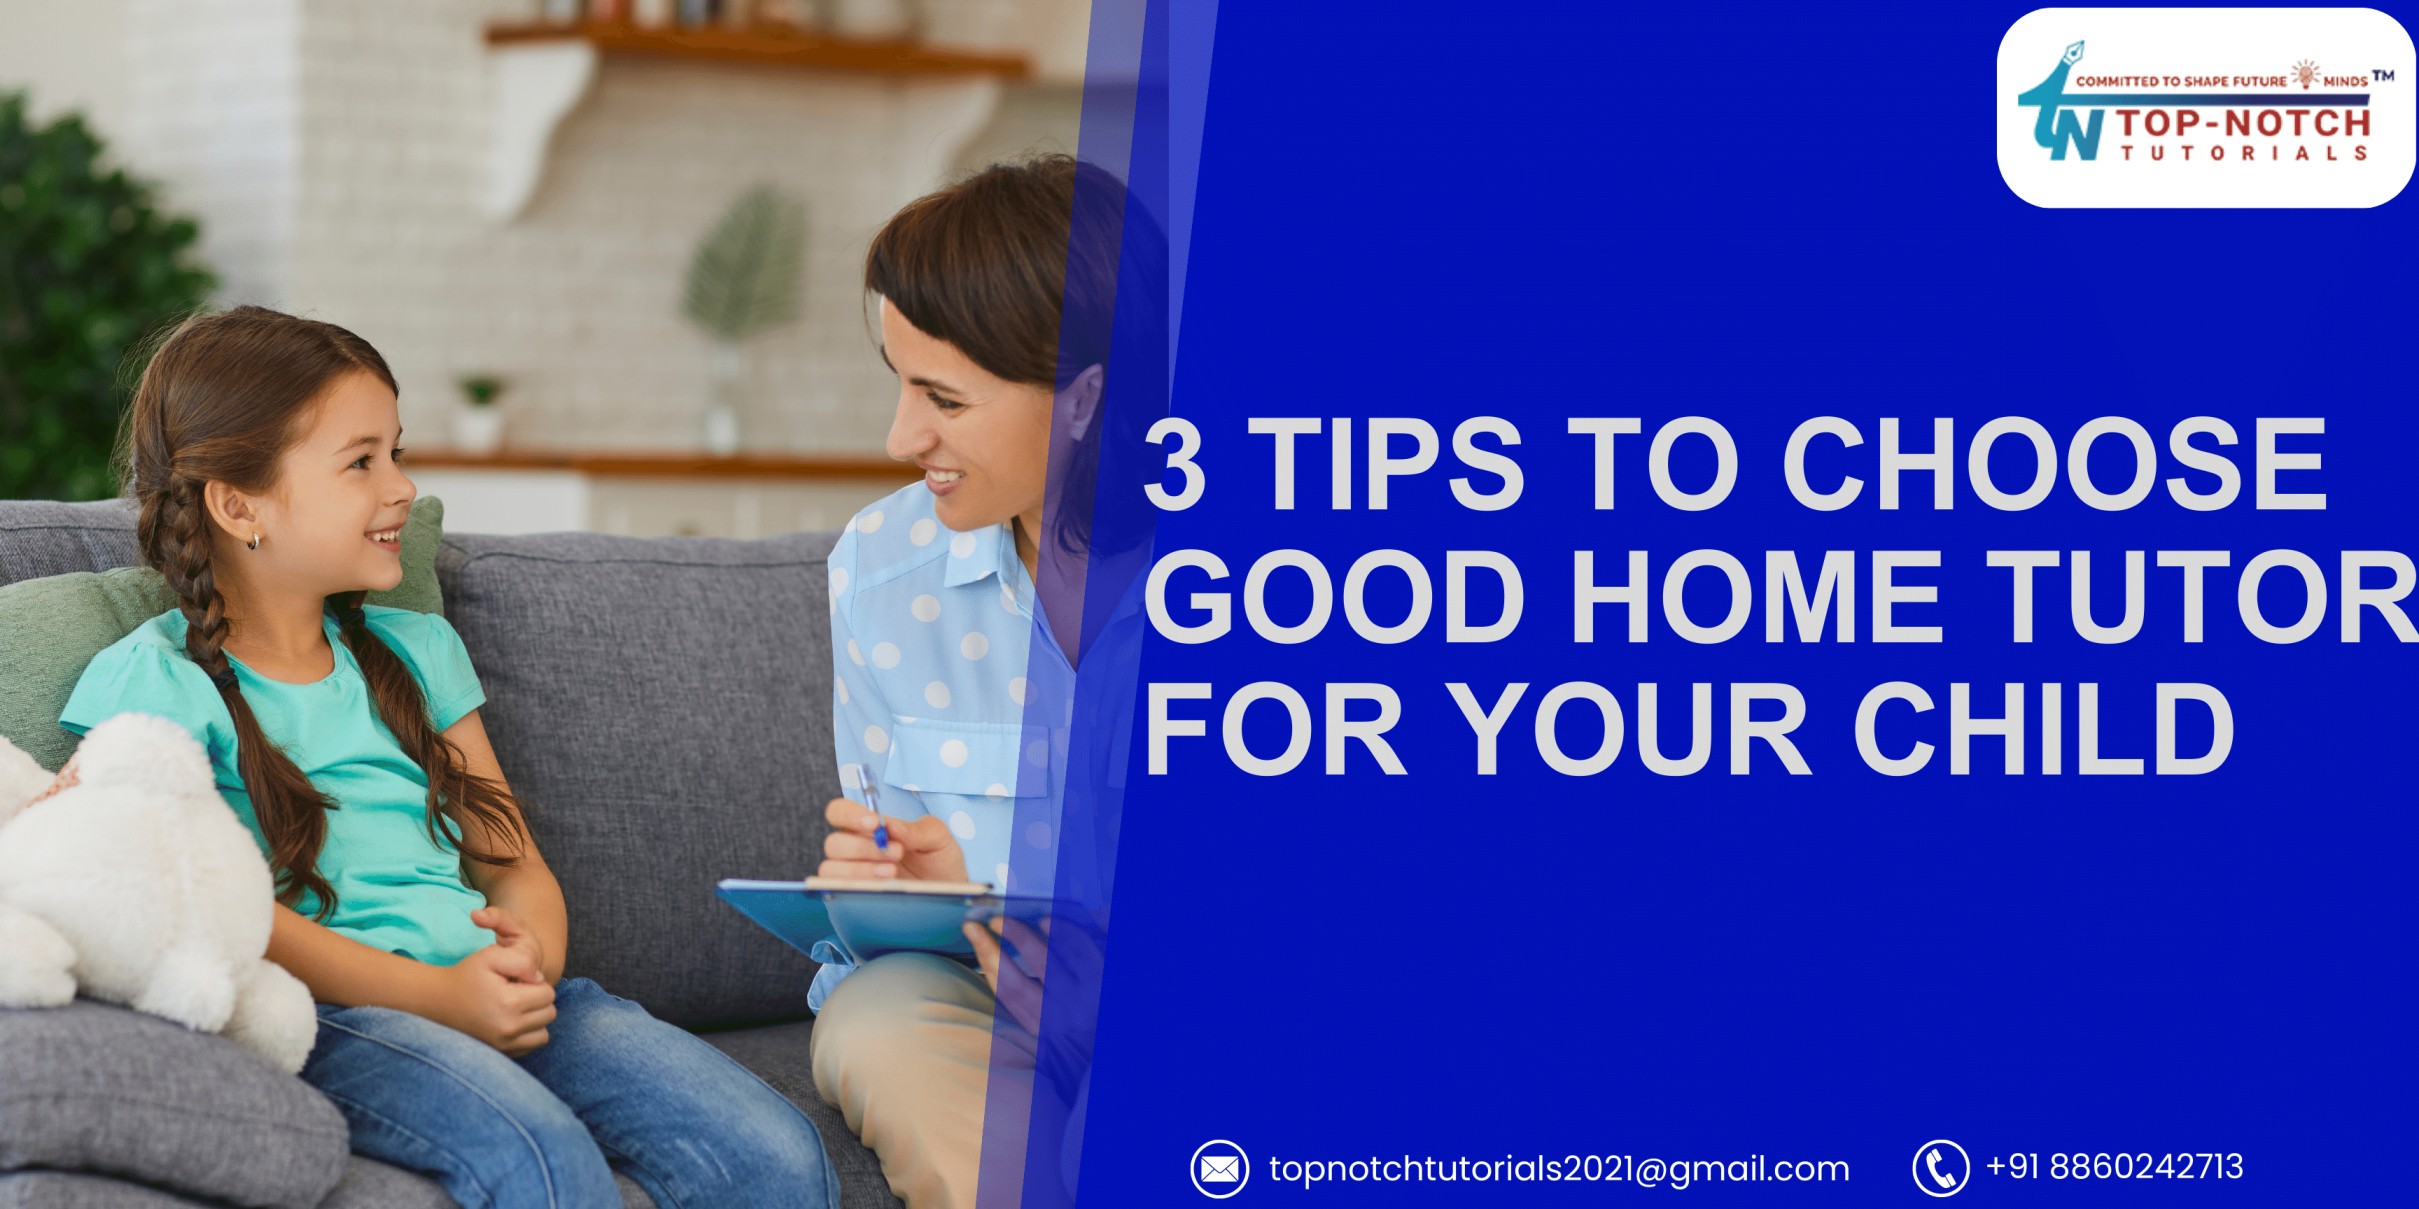 3 Tips to Choose Good Home Tutor for your Child